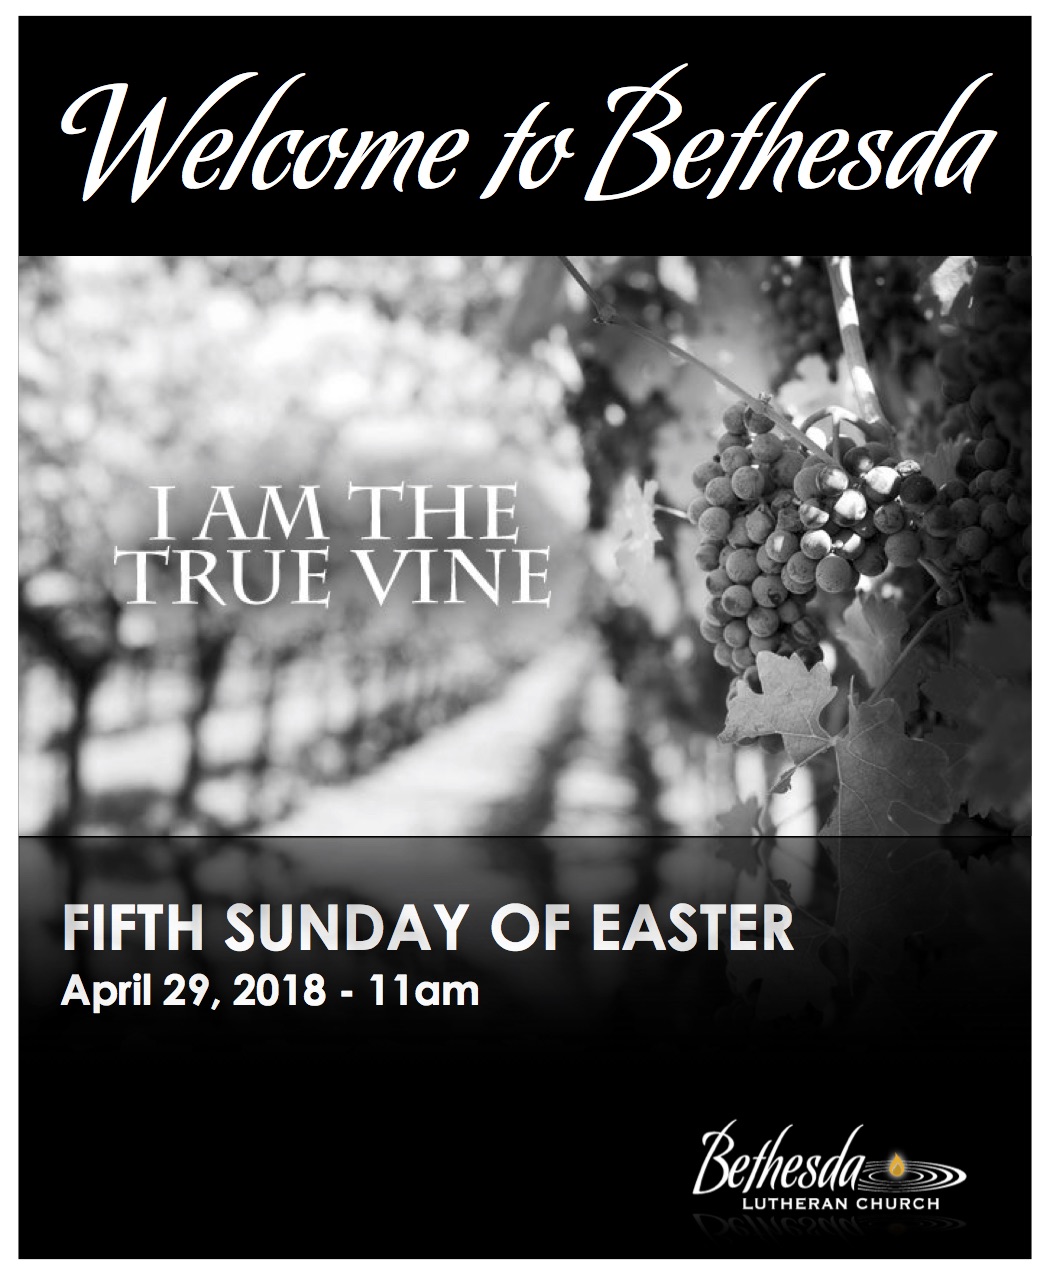 The Fifth Sunday of Easter 